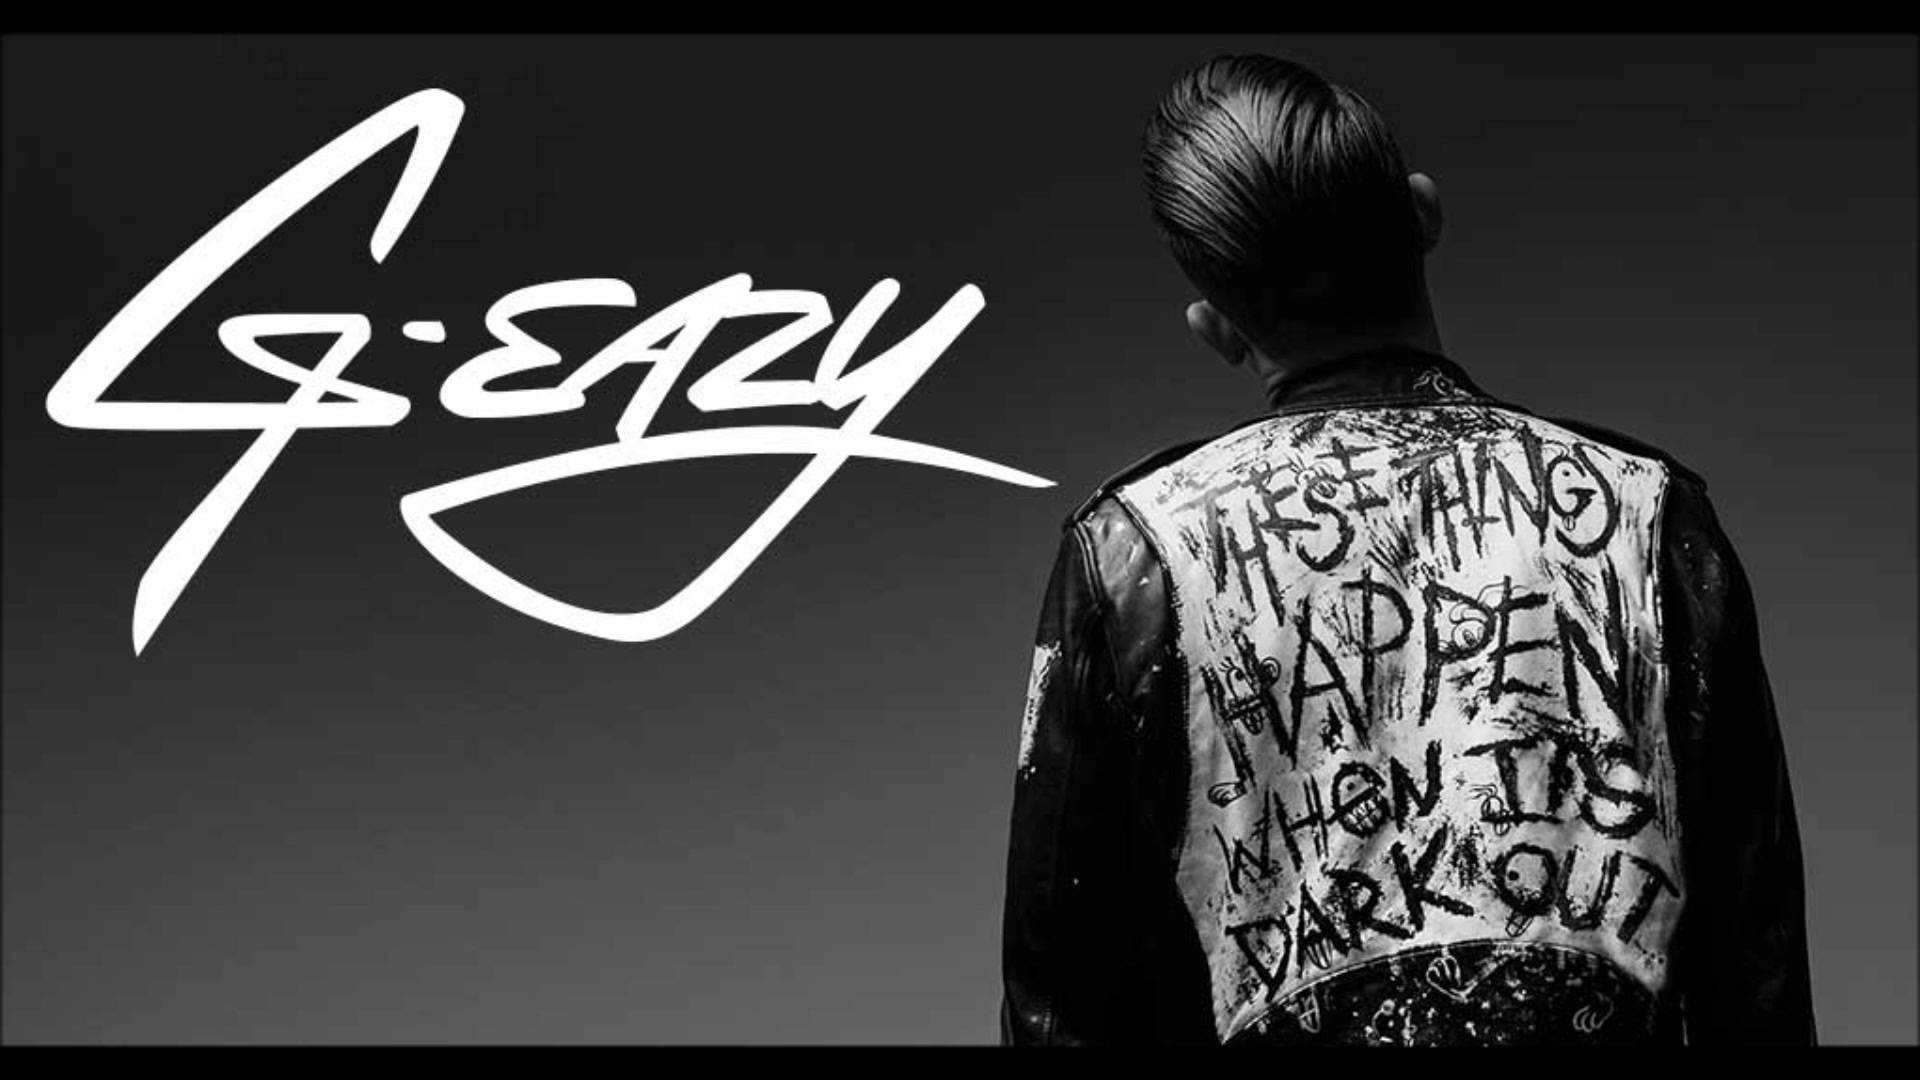 55 best images about G-eazy on Pinterest